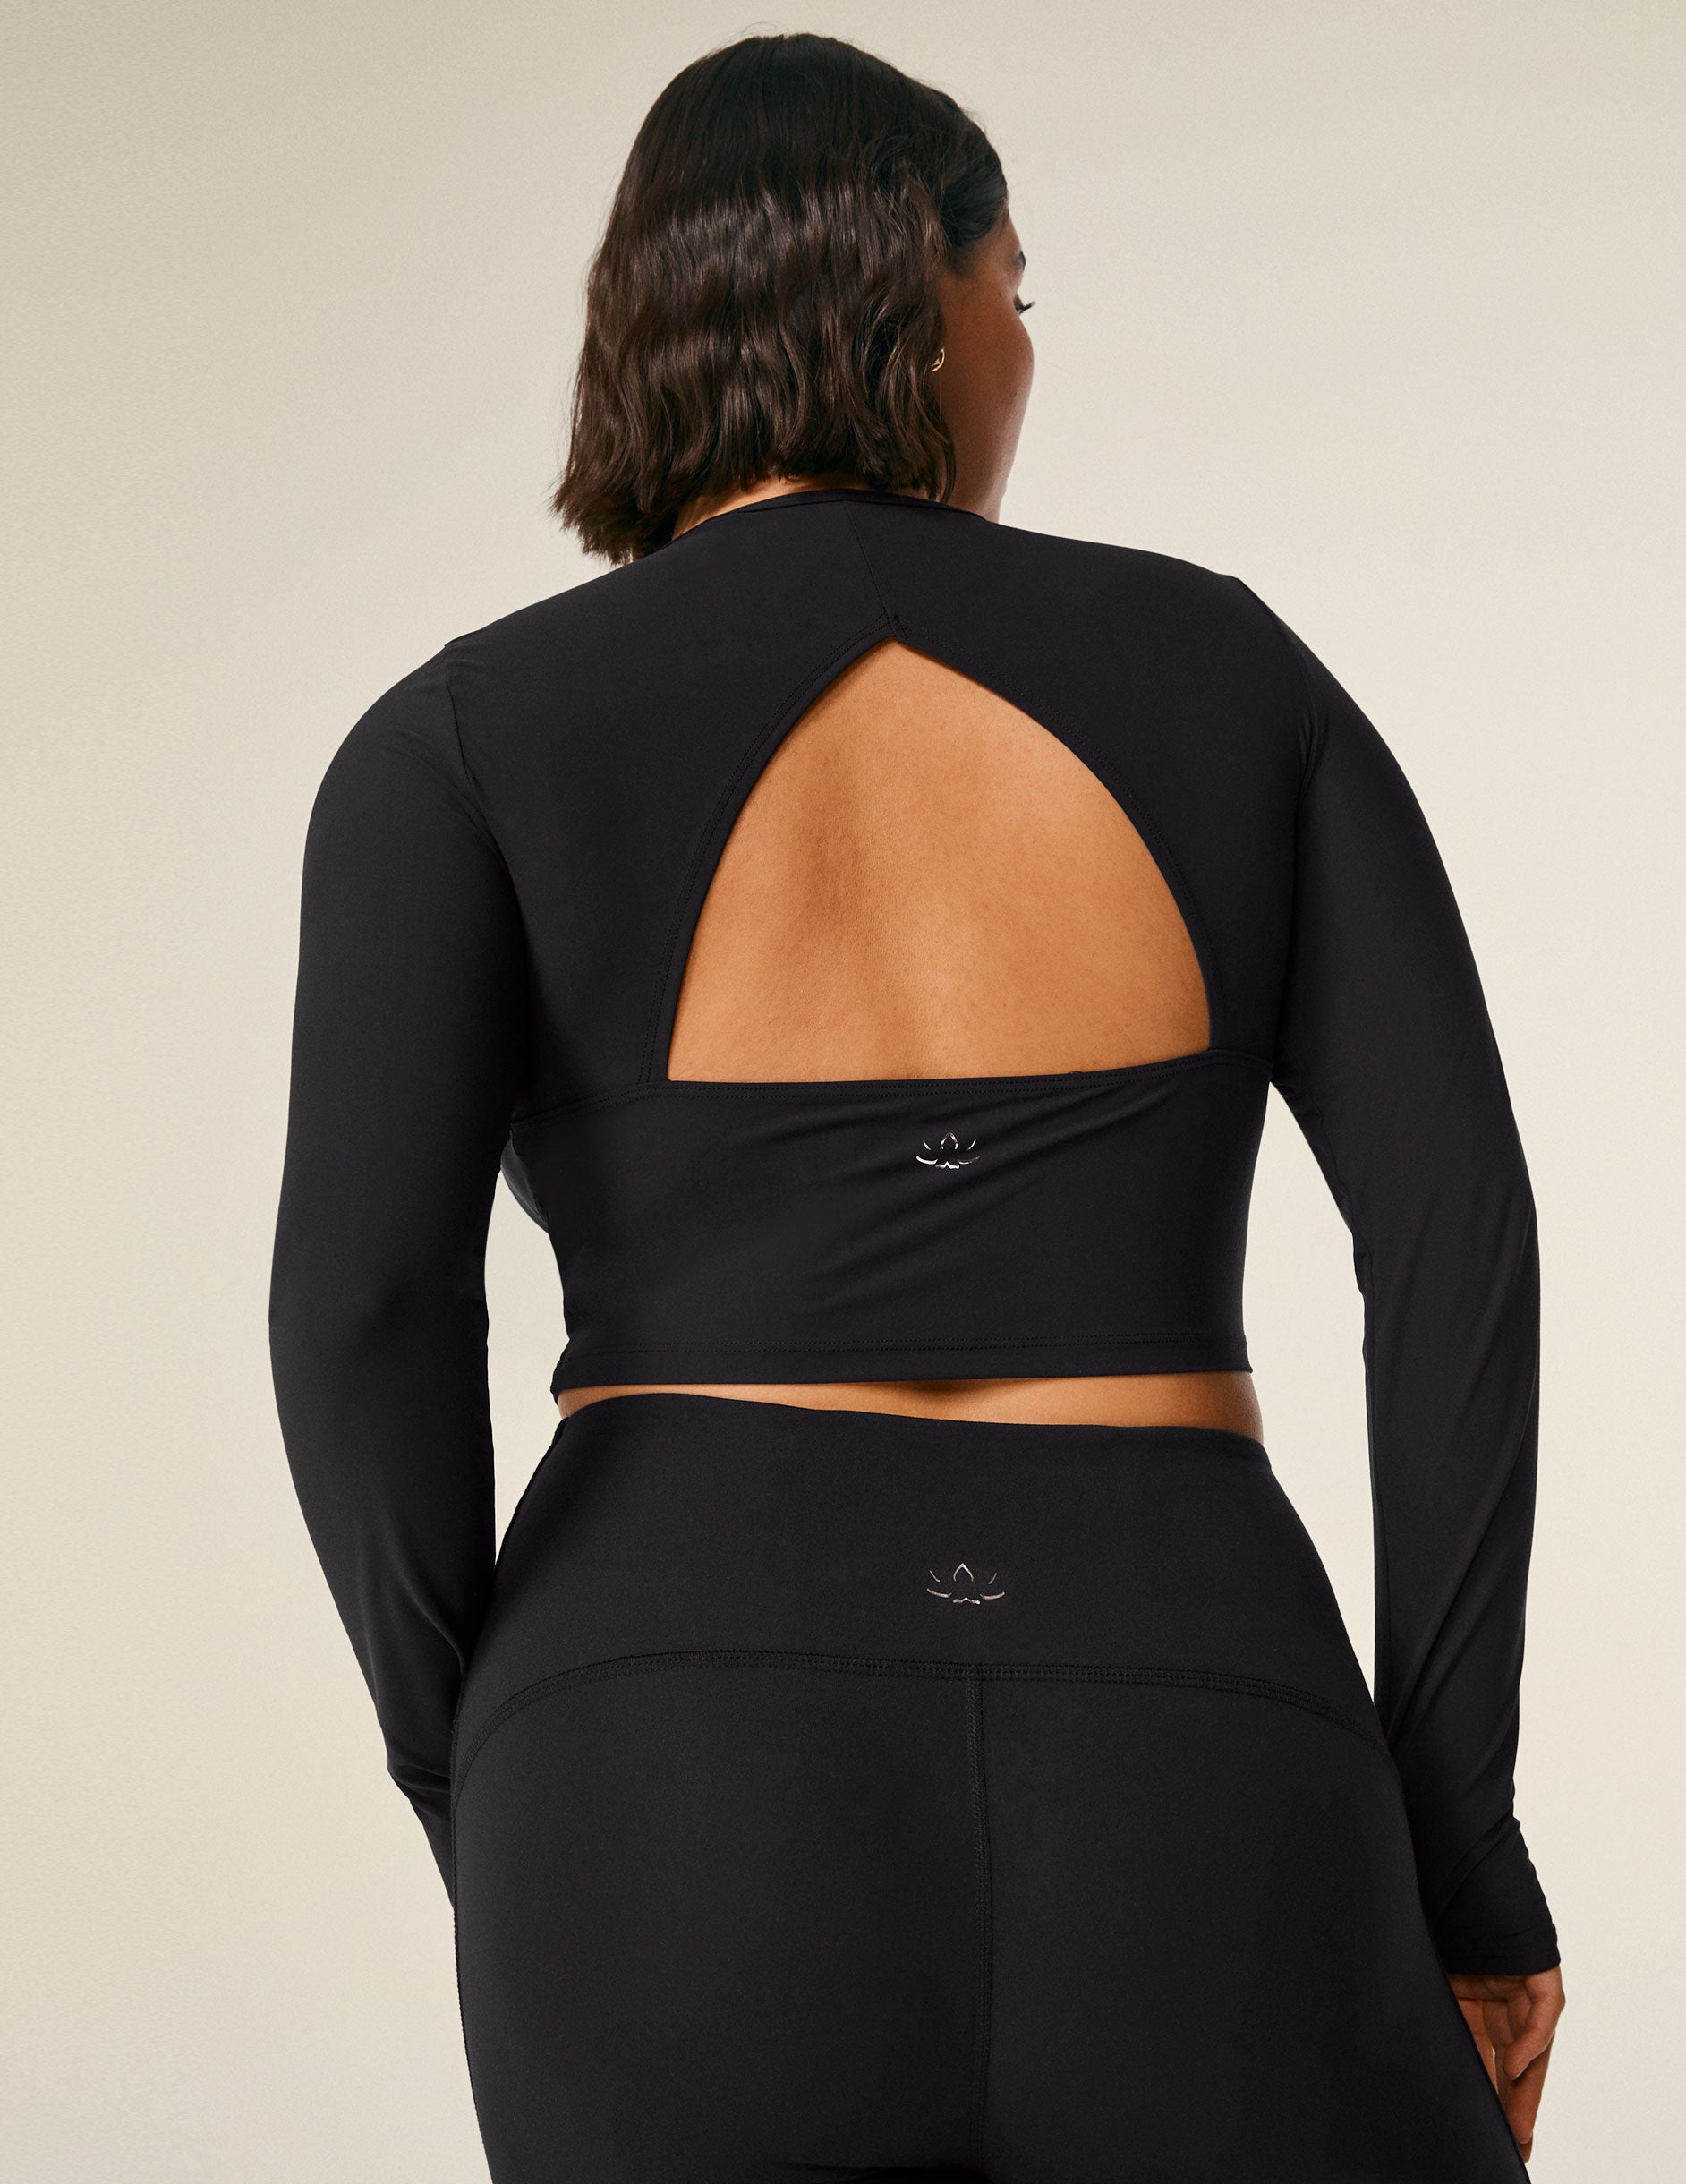 black long sleeve cropped top with an open back detail.